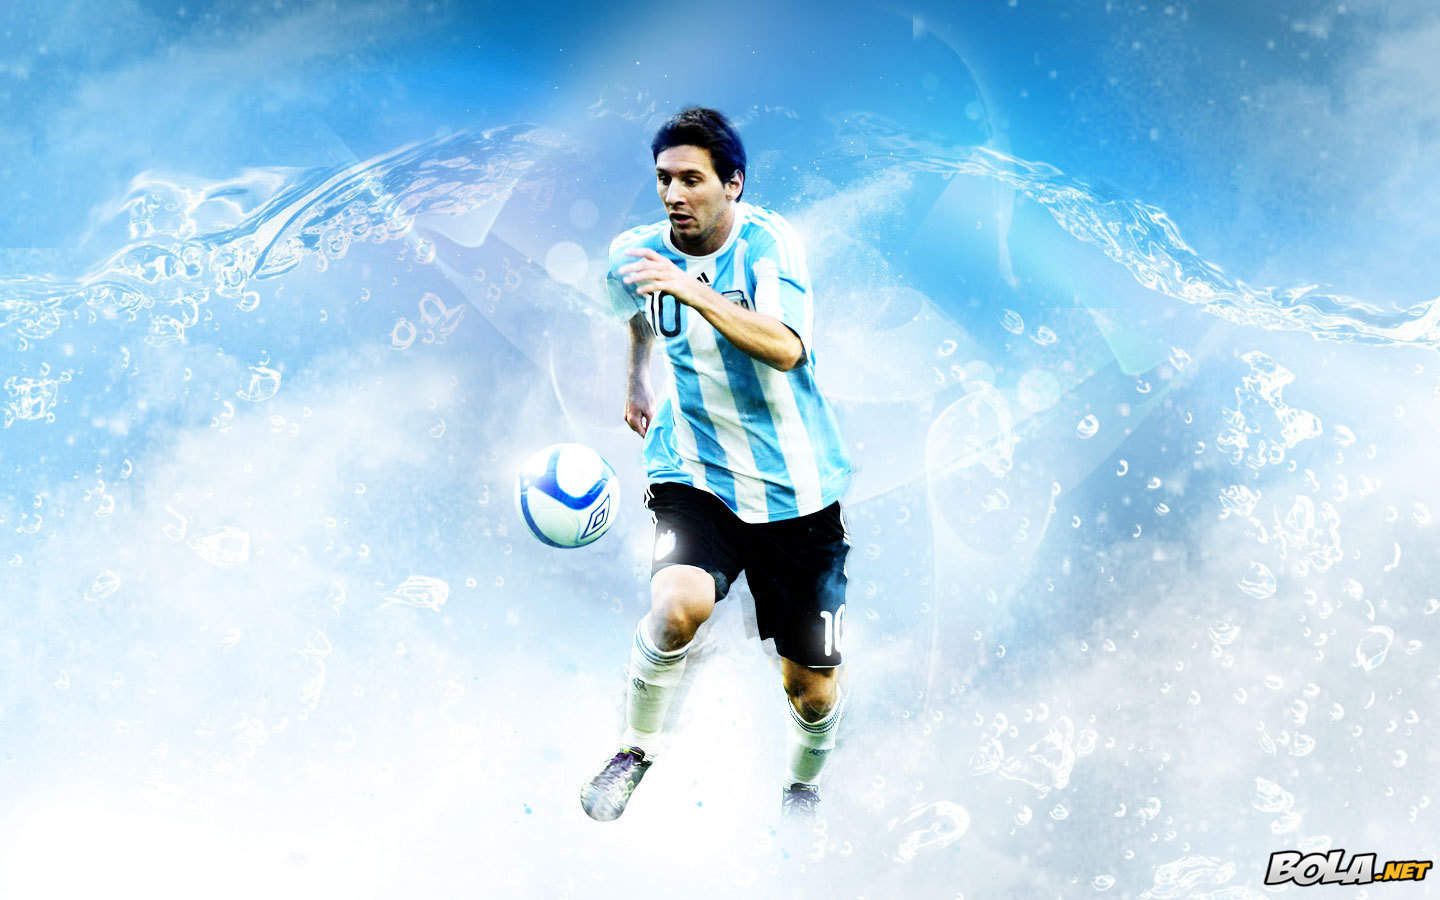 Lionel Messi Argentina 8300 Hd Wallpapers in Football   Imagescicom